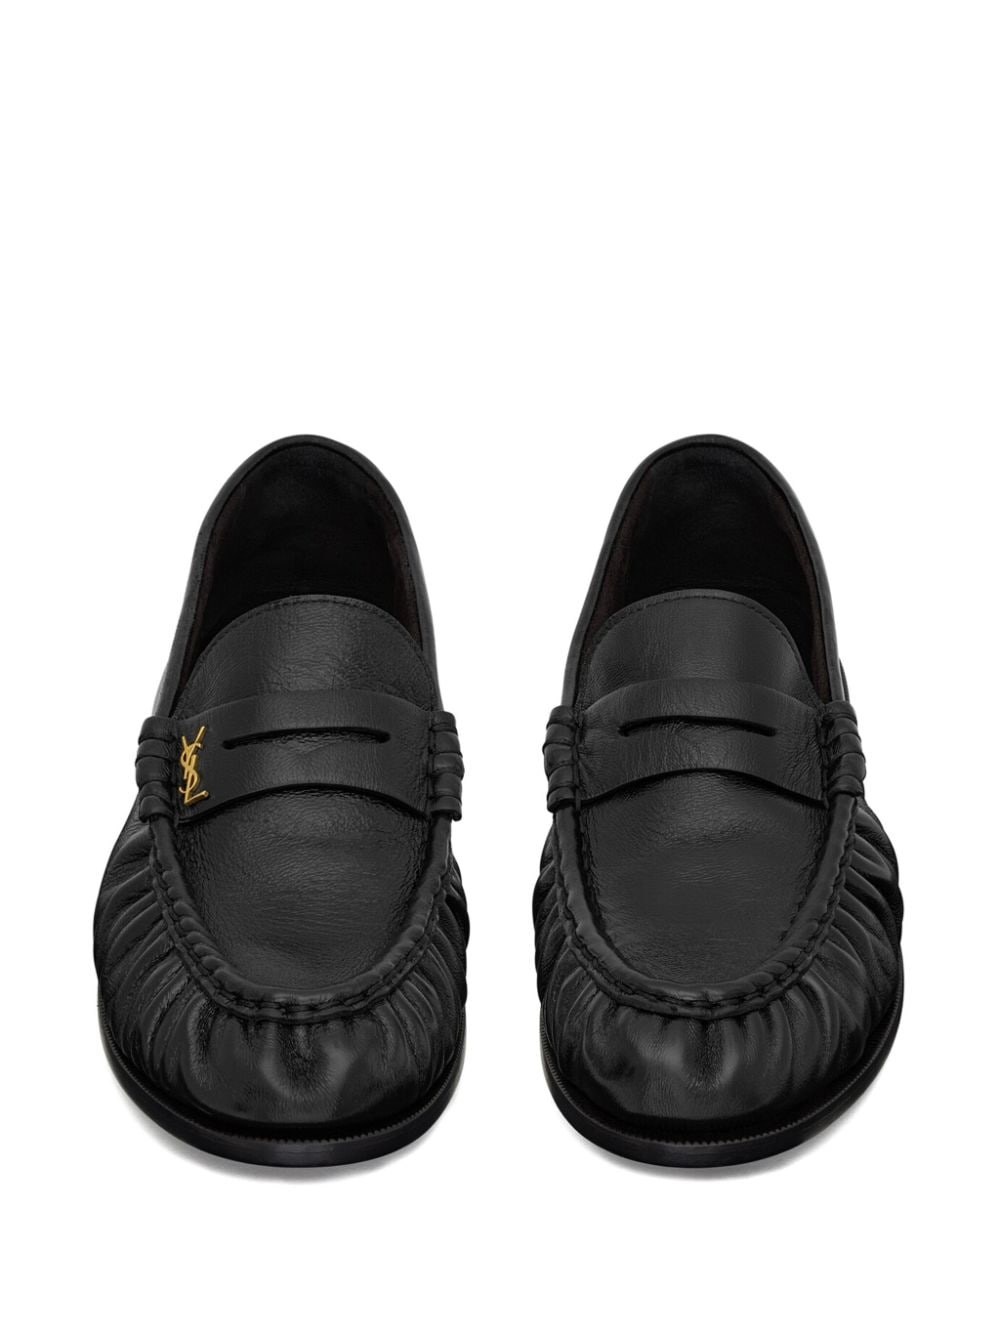 Le Loafer leather loafers - 3